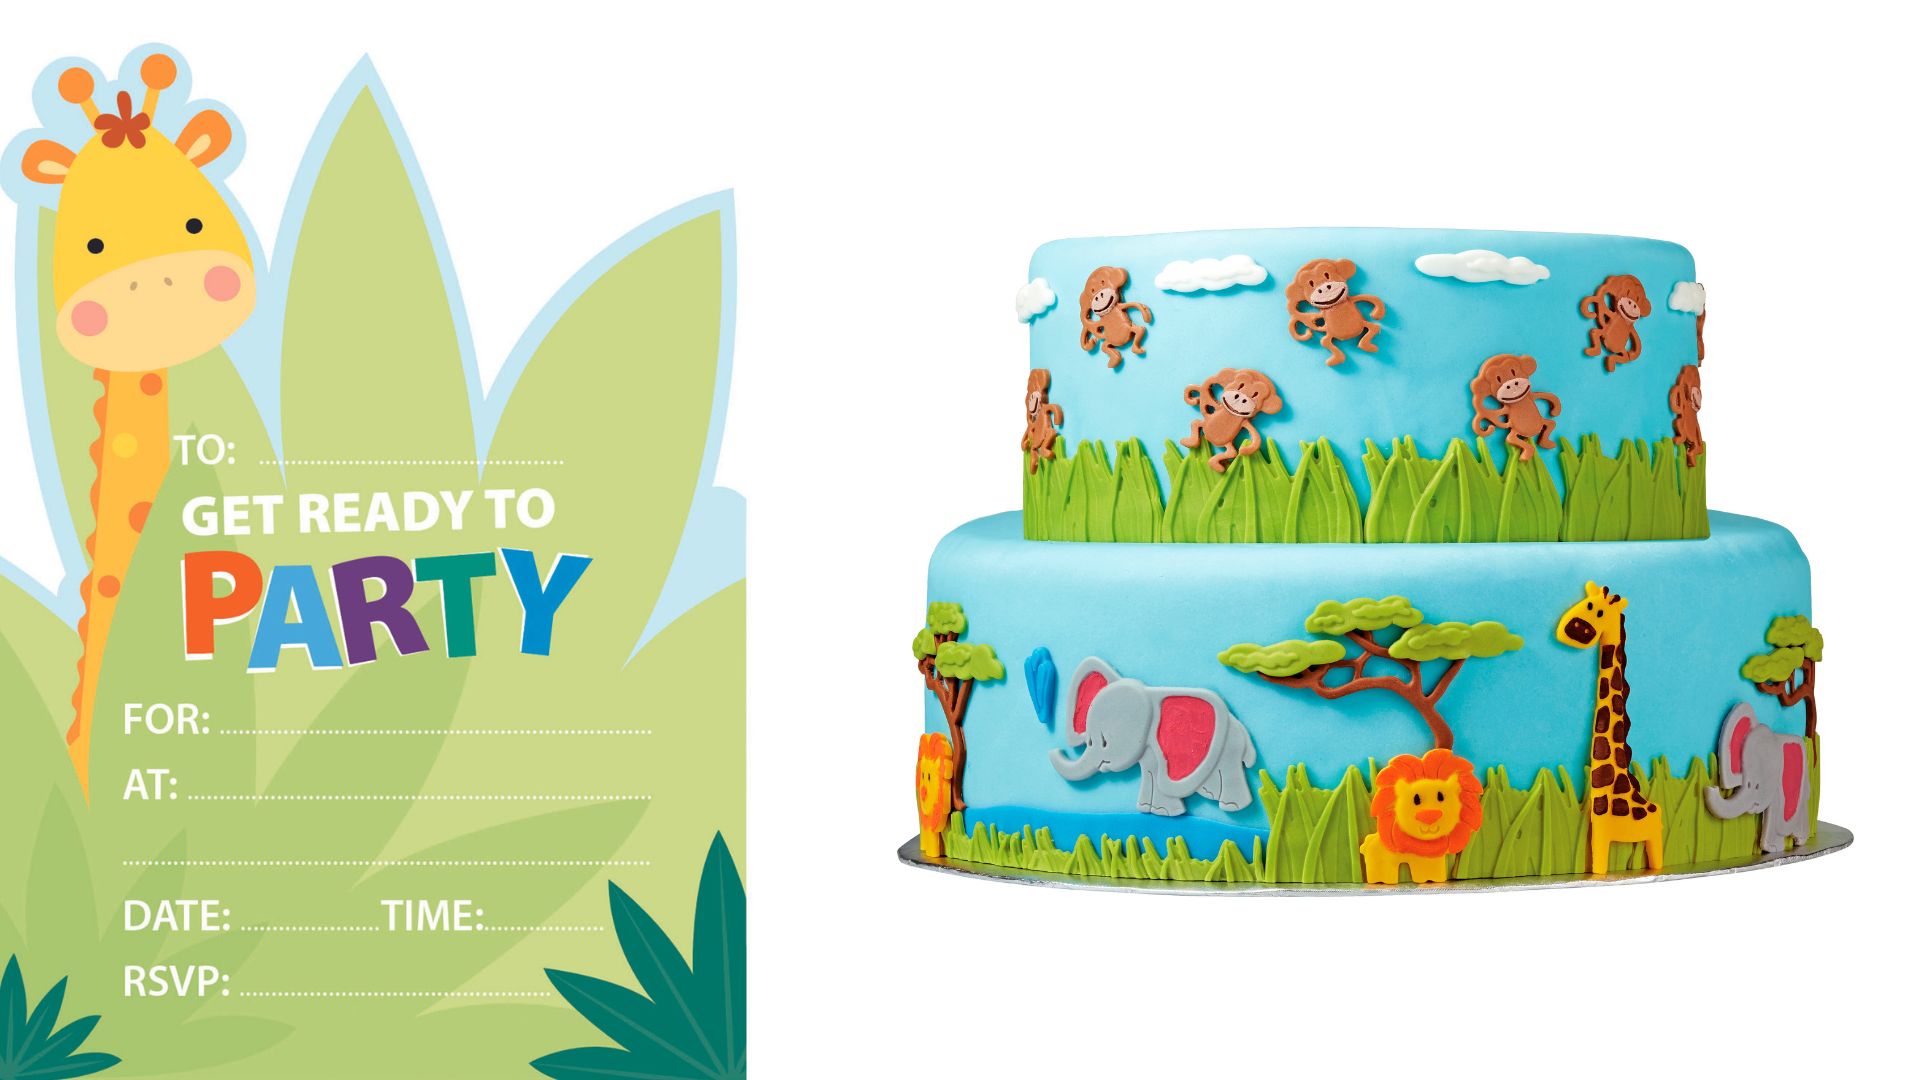 Celebrate In Jungle Style With Themed Invitations & Birthday Cakes